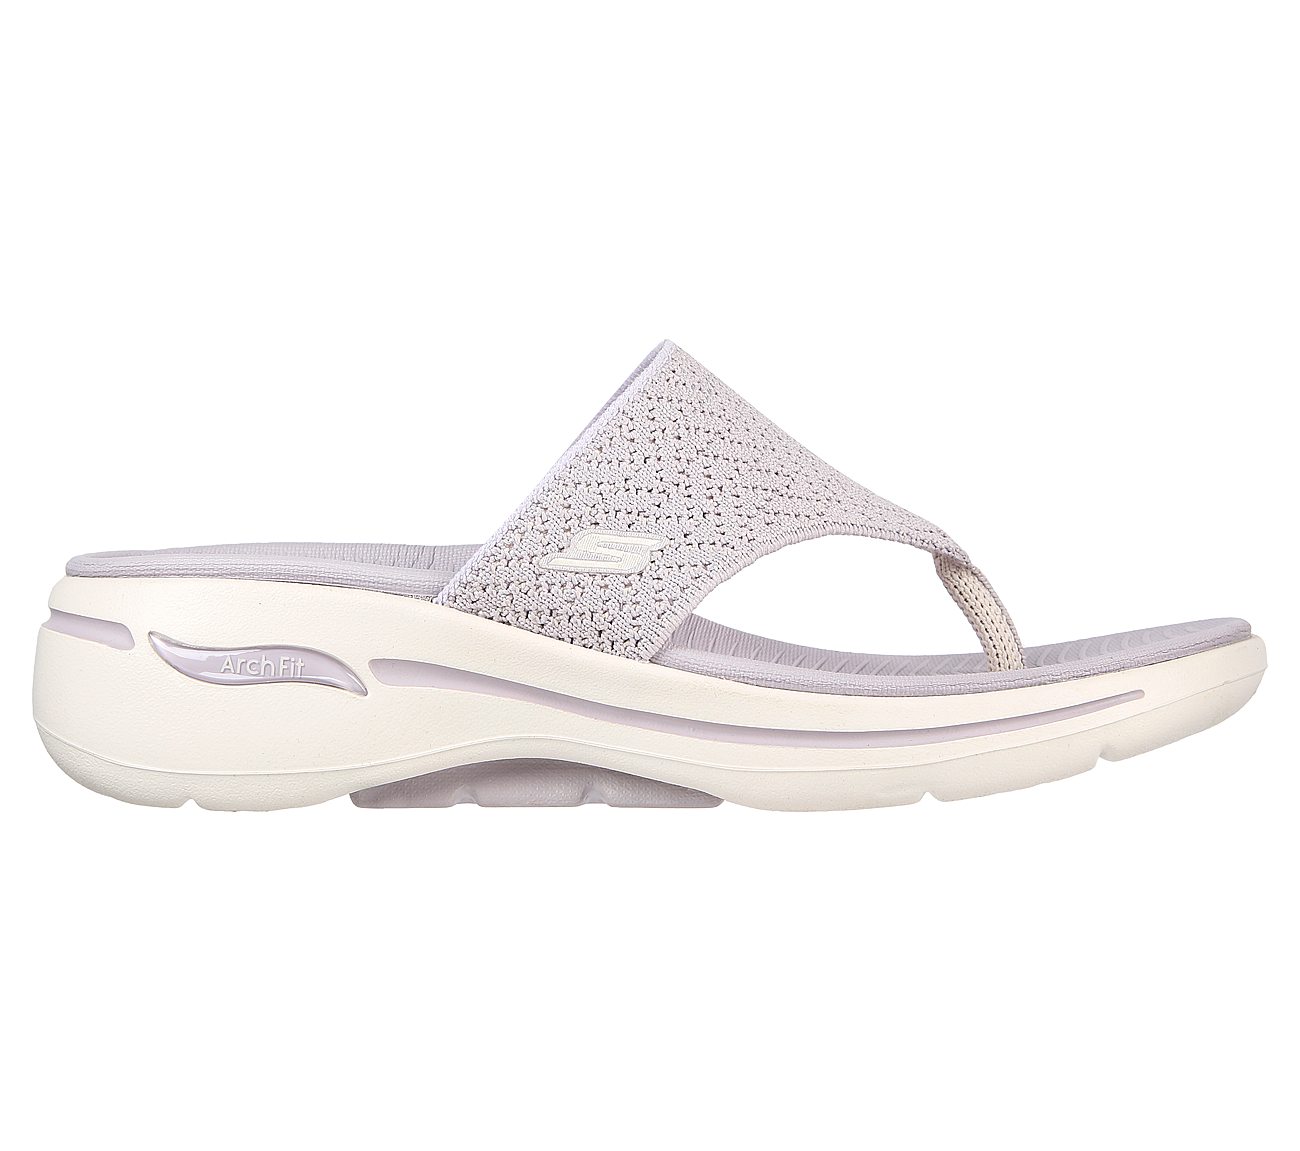 GO WALK ARCH FIT SANDAL - WEE, LILAC Footwear Right View